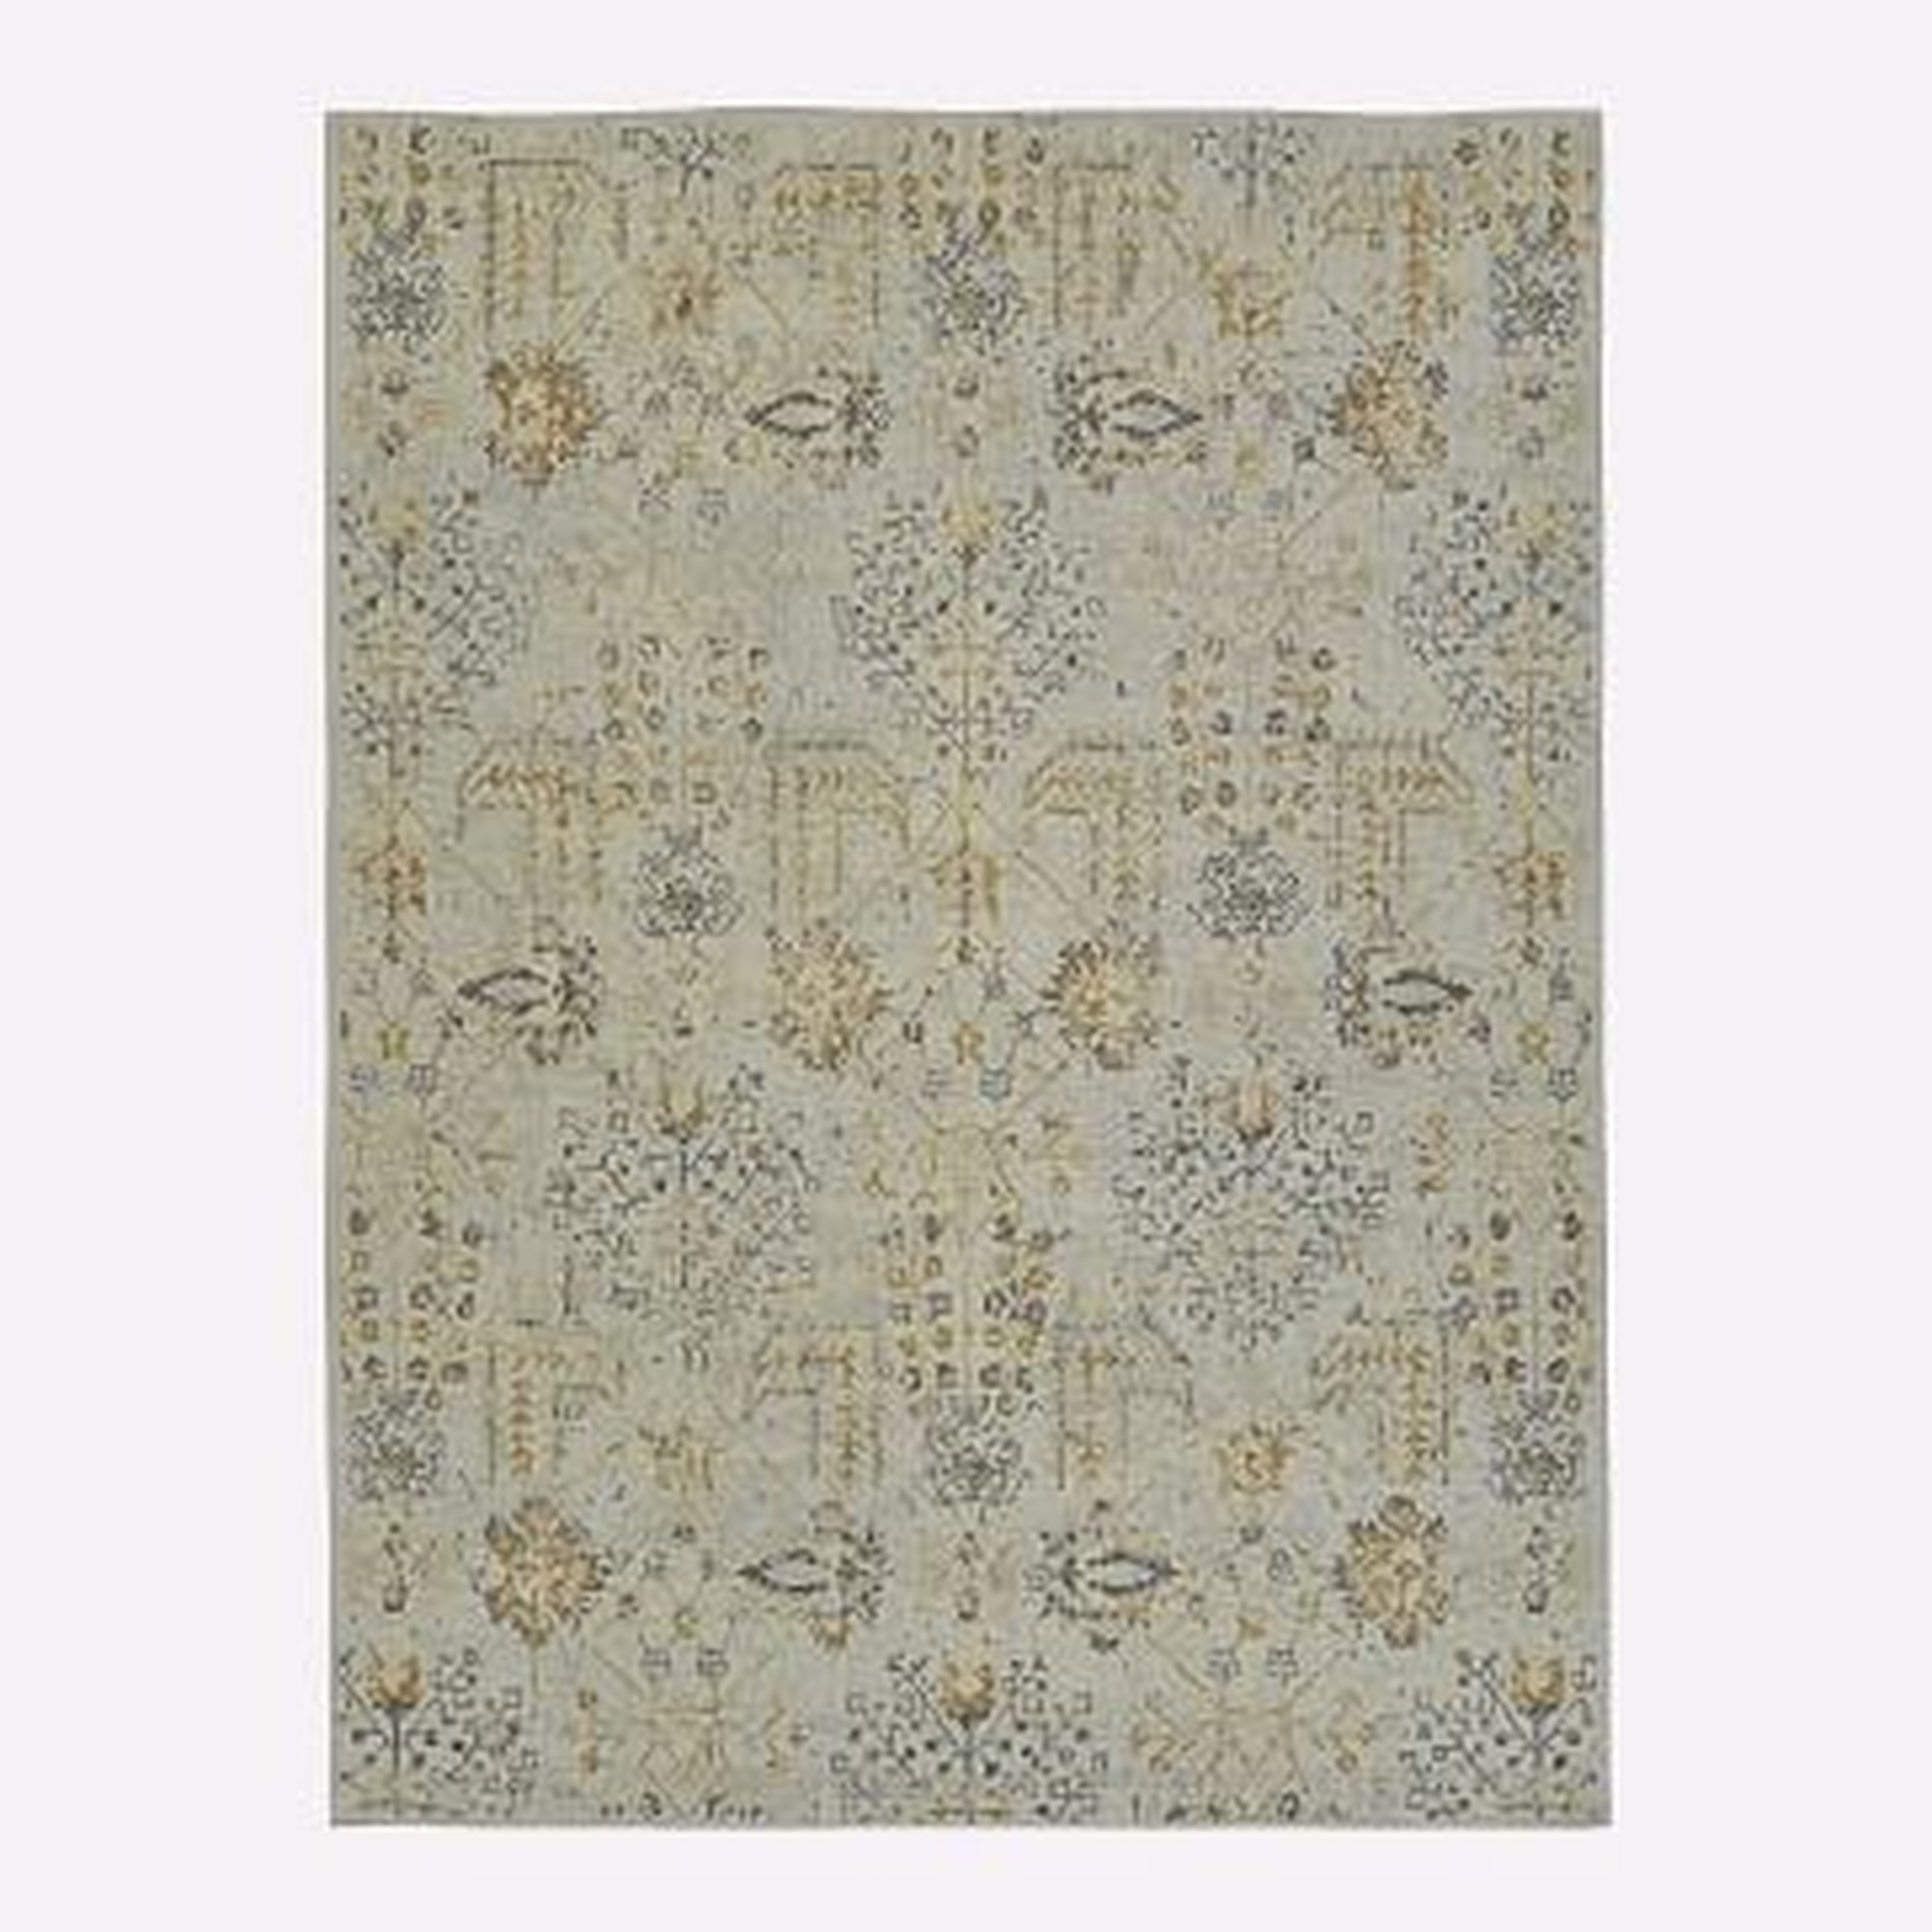 Printed Canopy Rug, Frost Gray, 6'x9' - West Elm